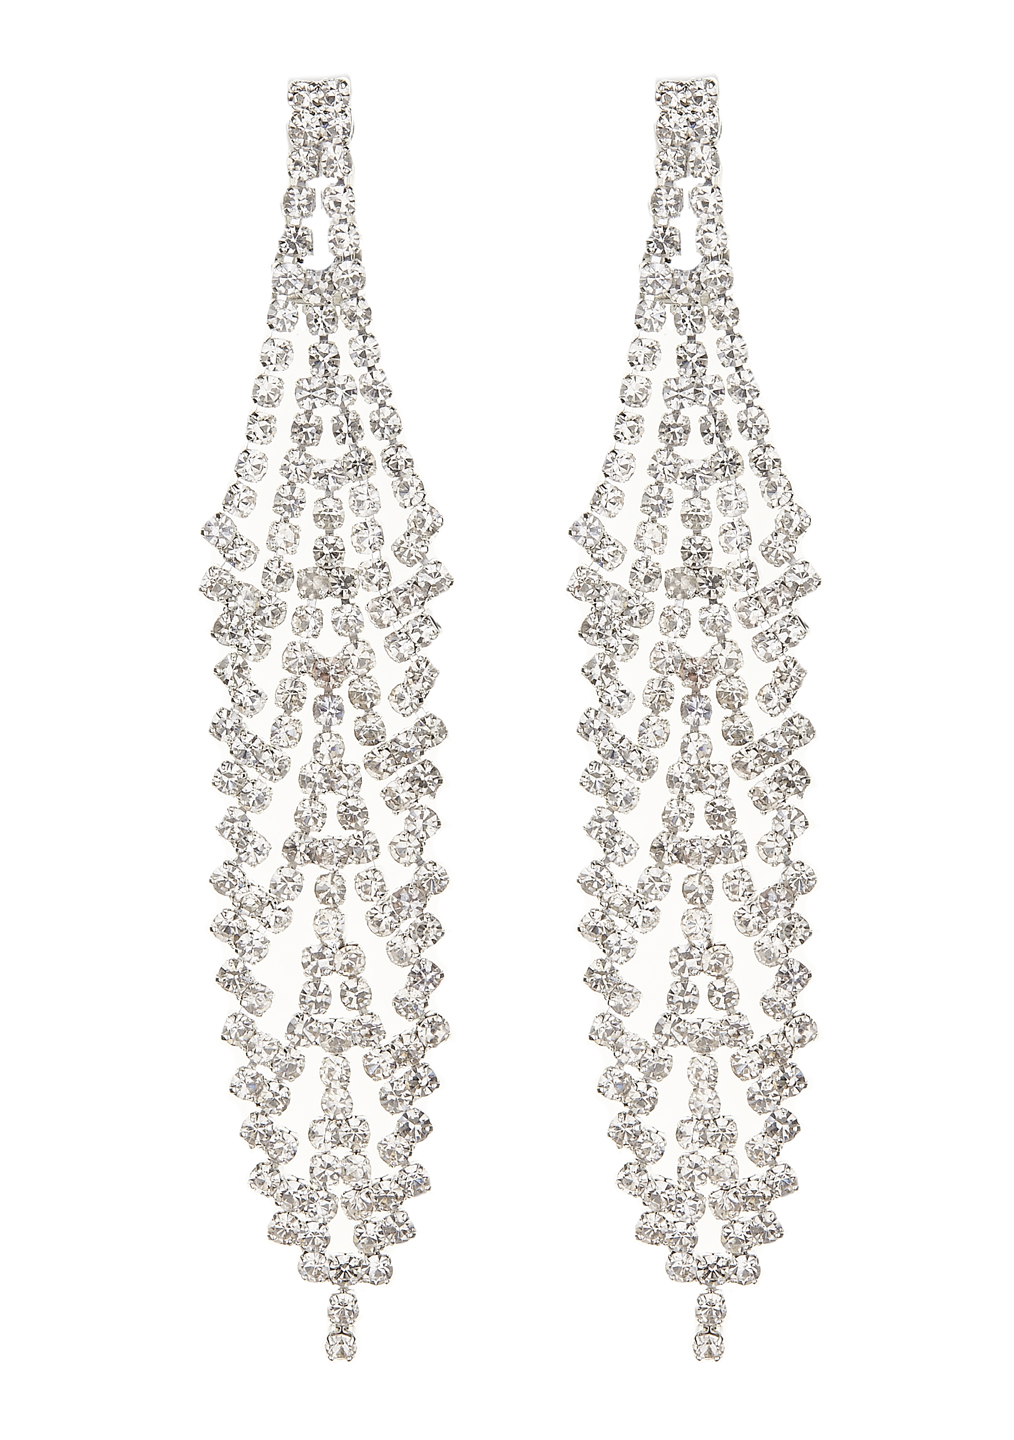 Clip On Earrings - Carew S - silver chandelier earring with clear crystals